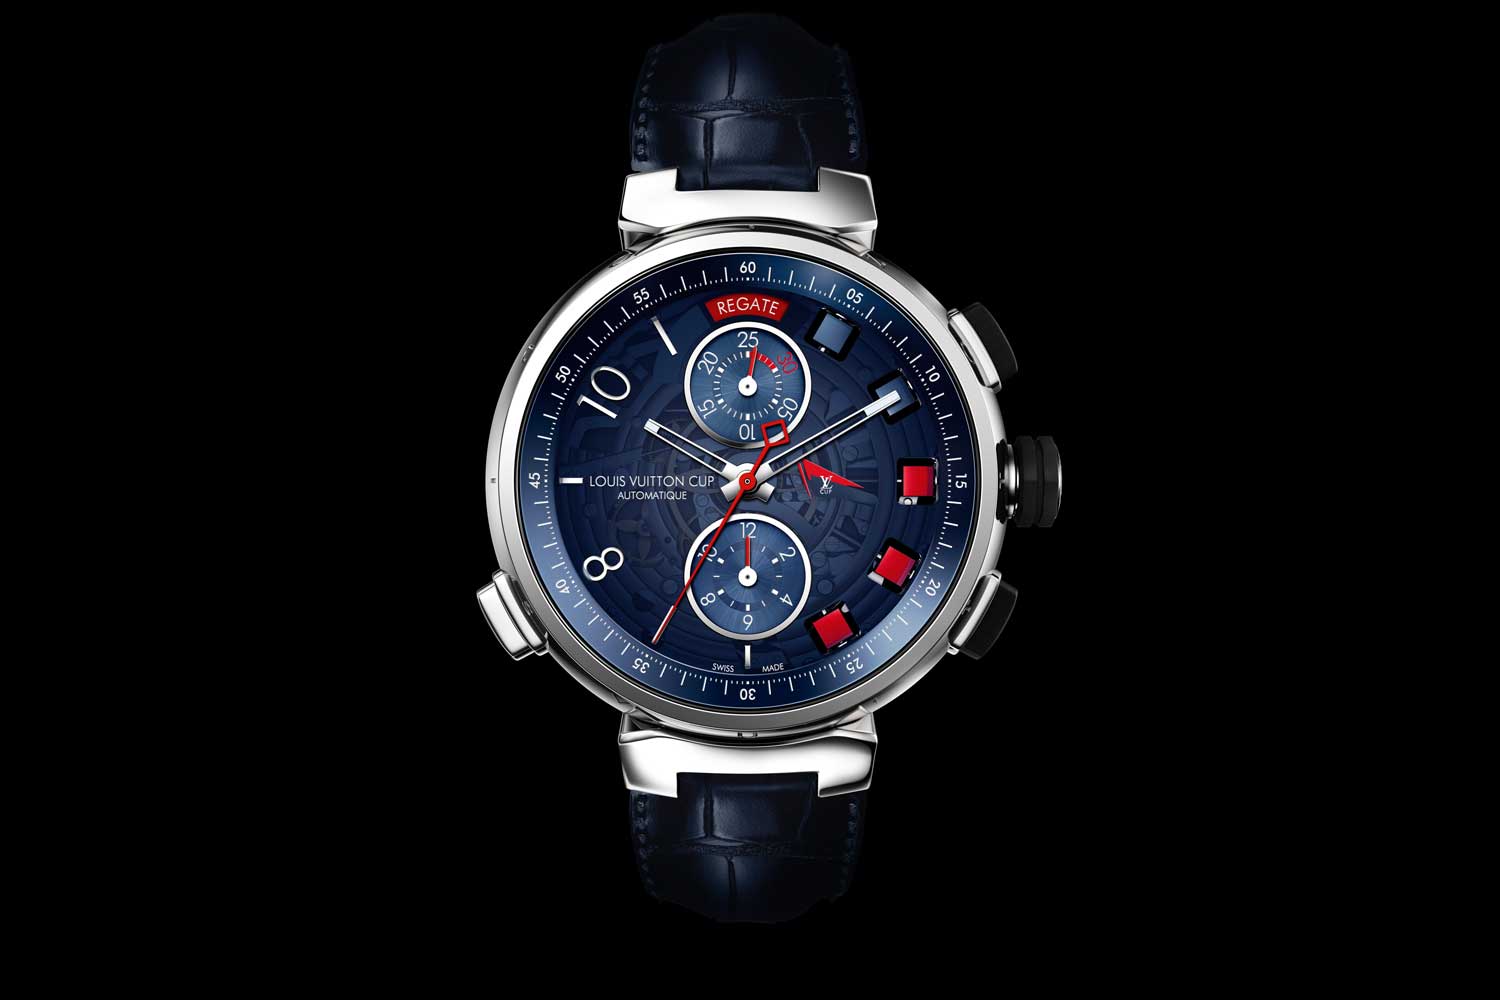 The Tambour Spin Time Regatta 2012 was clad in innovative blue transparent sapphire that showcased the inner workings of the jumping hour